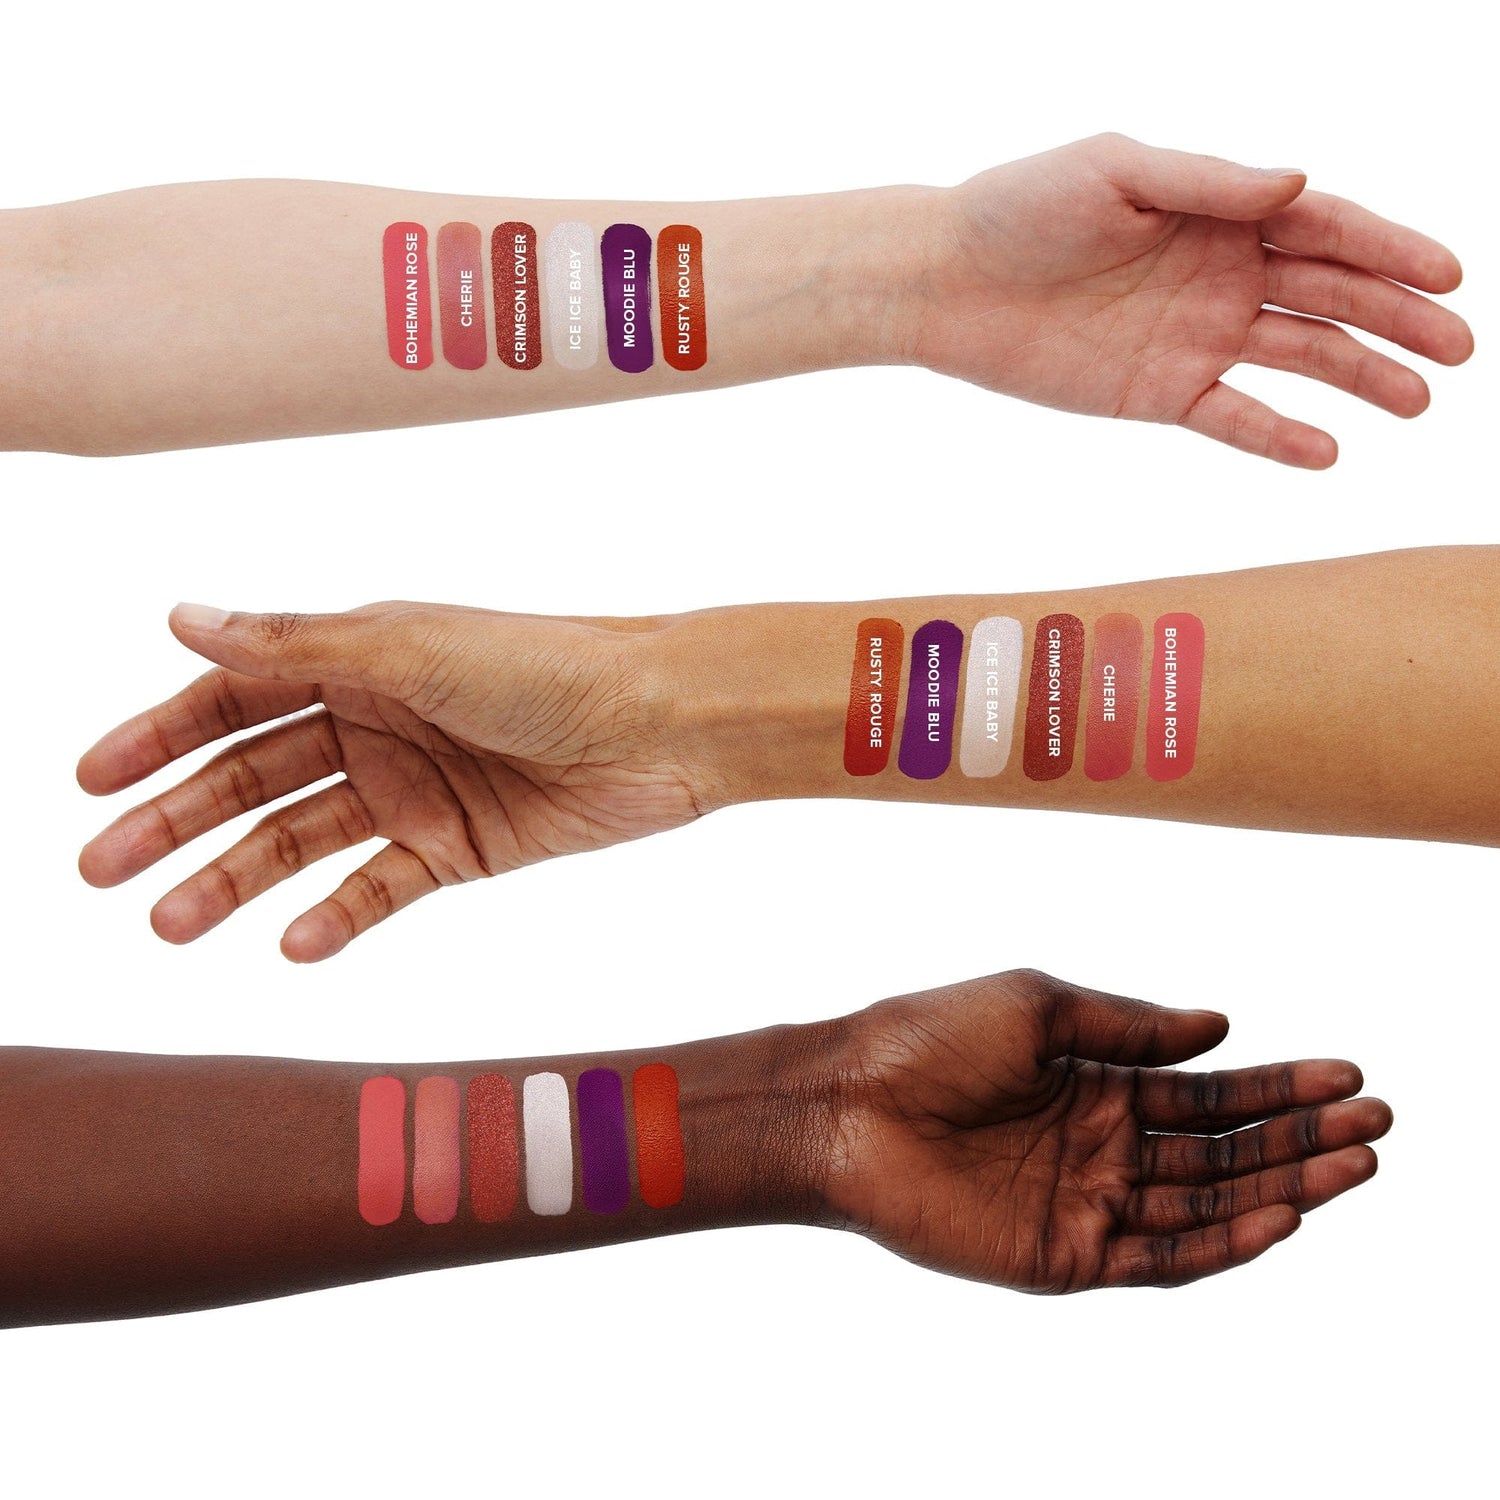 Three arms in different skin tones with swatches of all Nudies Glow Highlighter stick shades